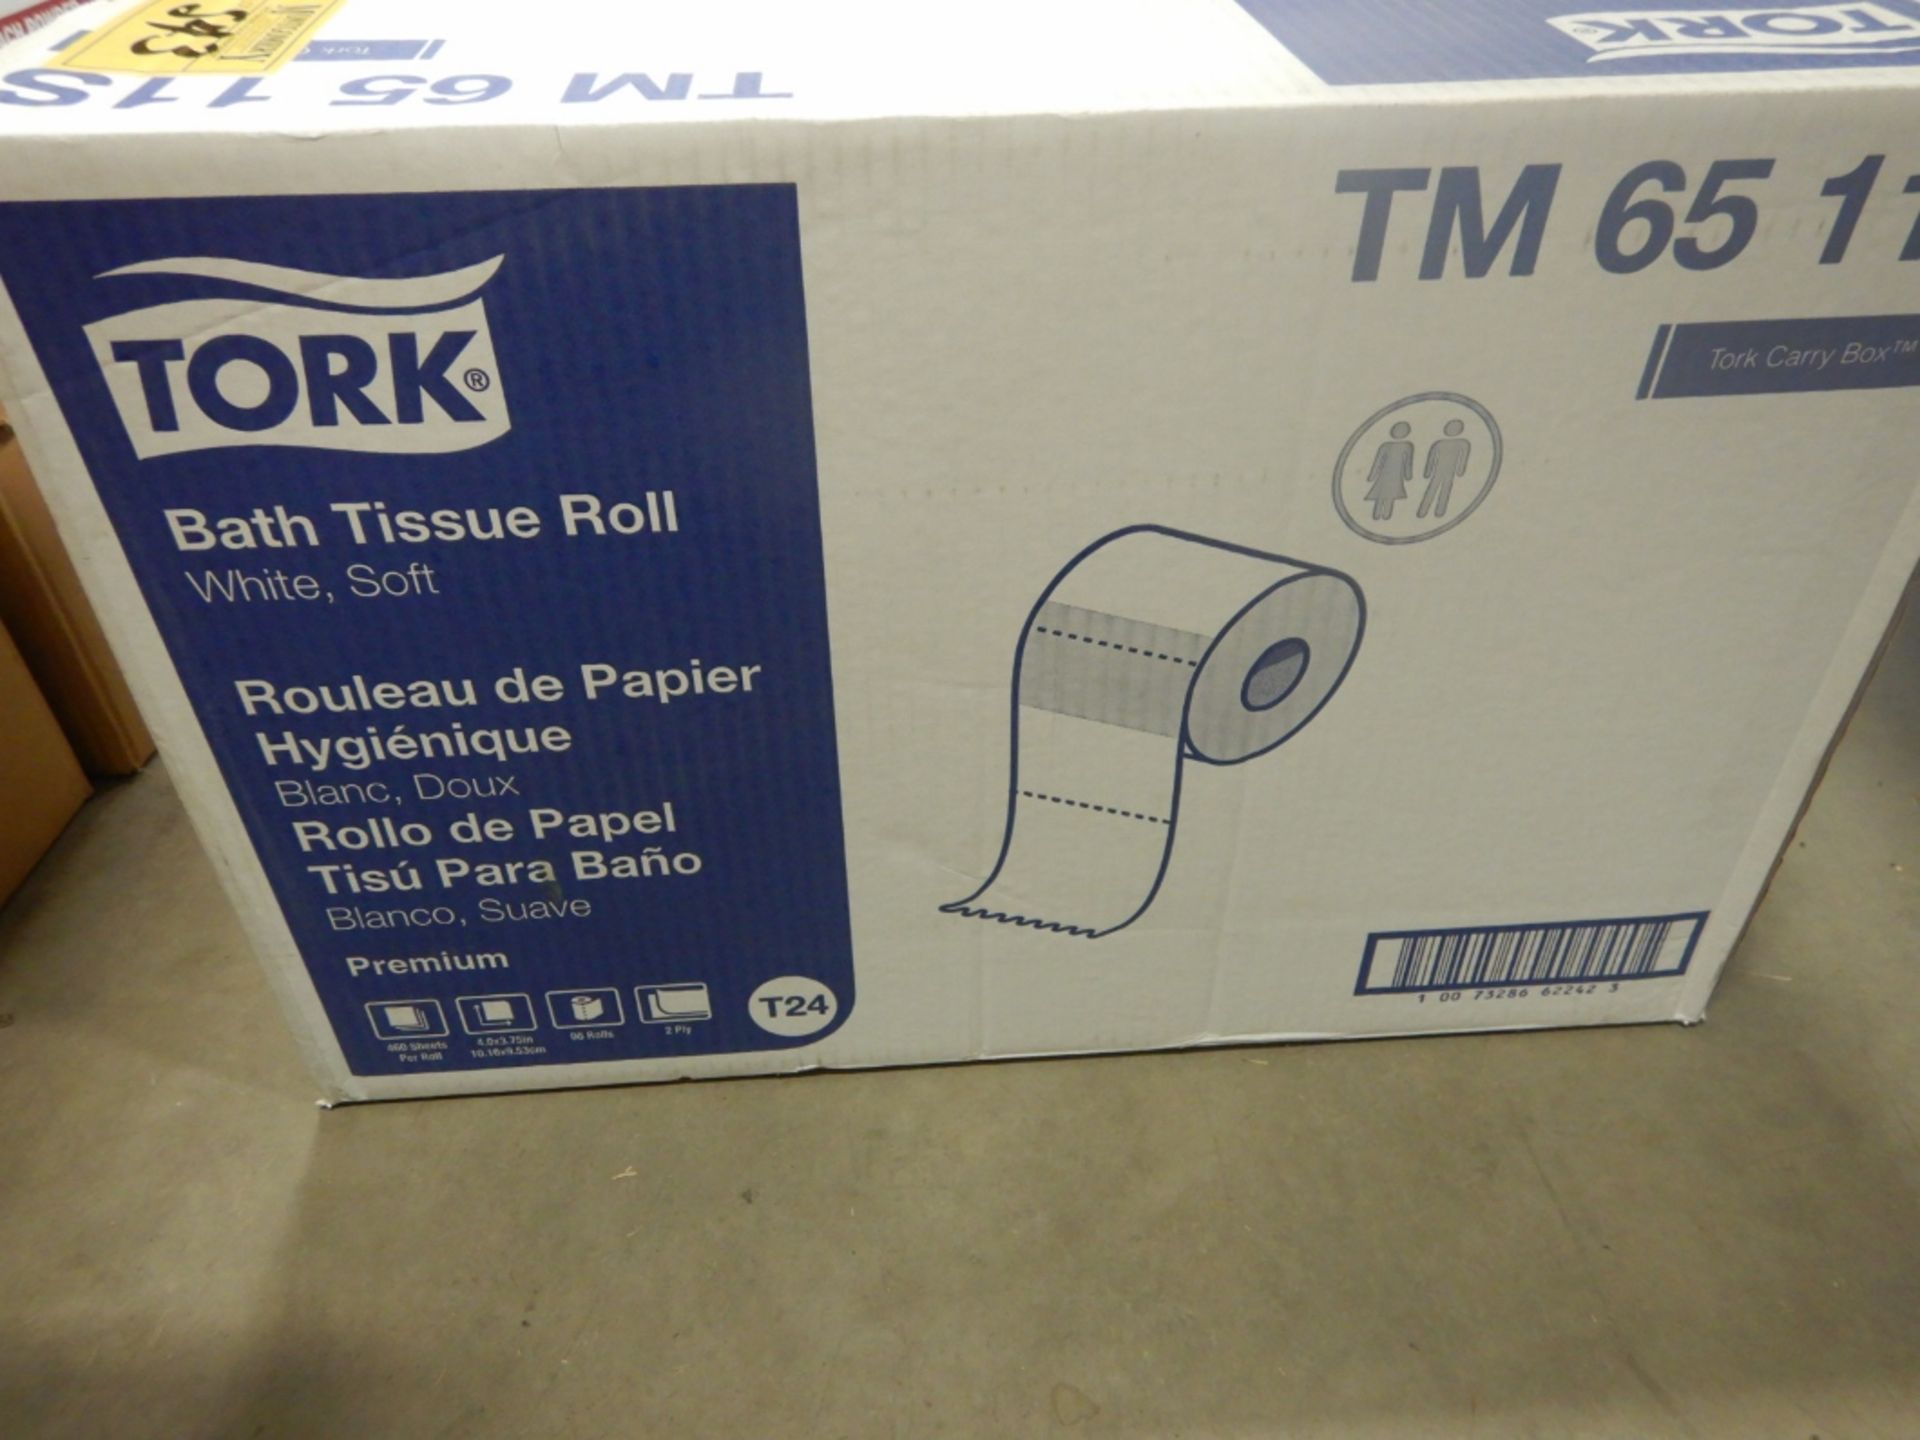 2-BOXES OF TORK BATH TISSUE ROLL, SOFT, T24